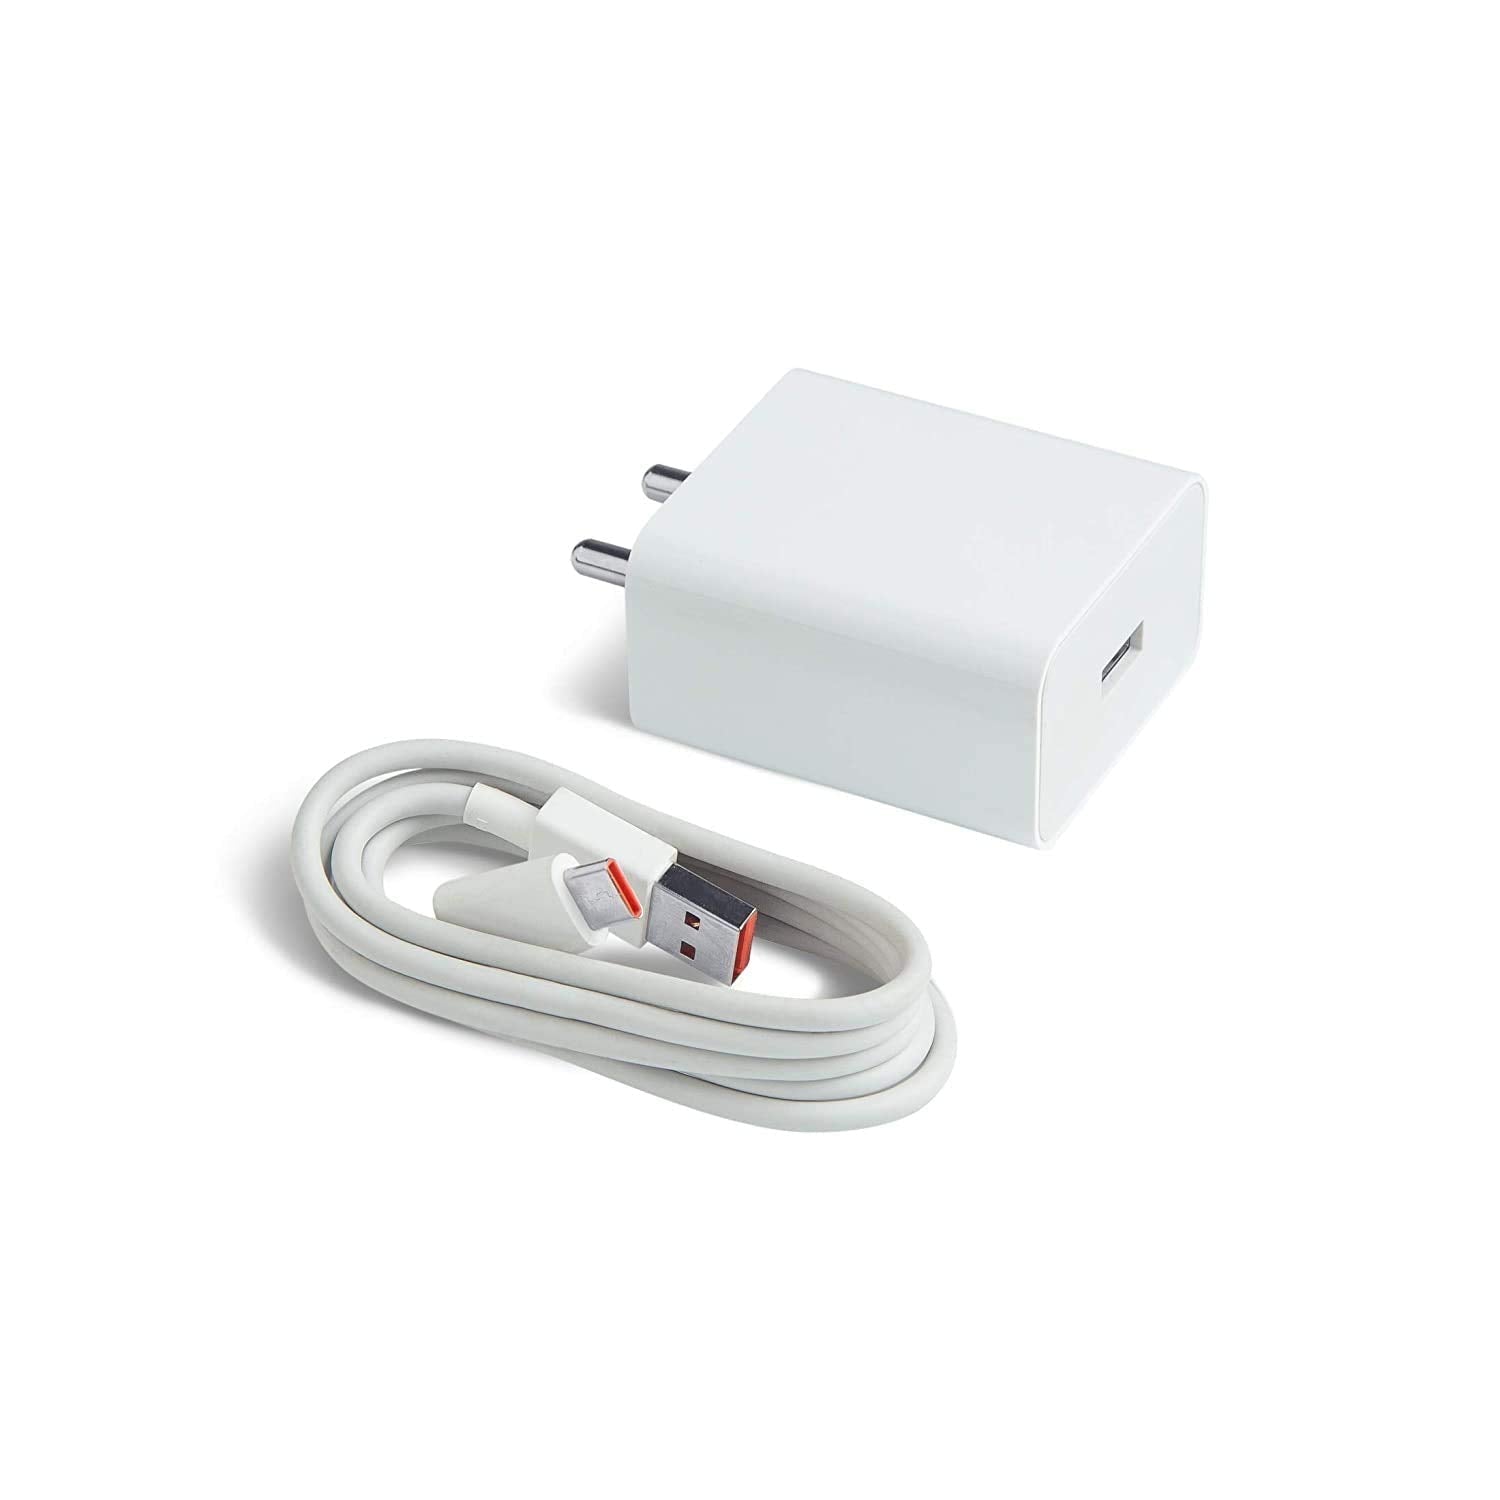 XIAOMI Redmi (MI) Note 10T 5G Superfast 33W Support SonicCharge 2.0 Mobile Charger With Type-C Cable